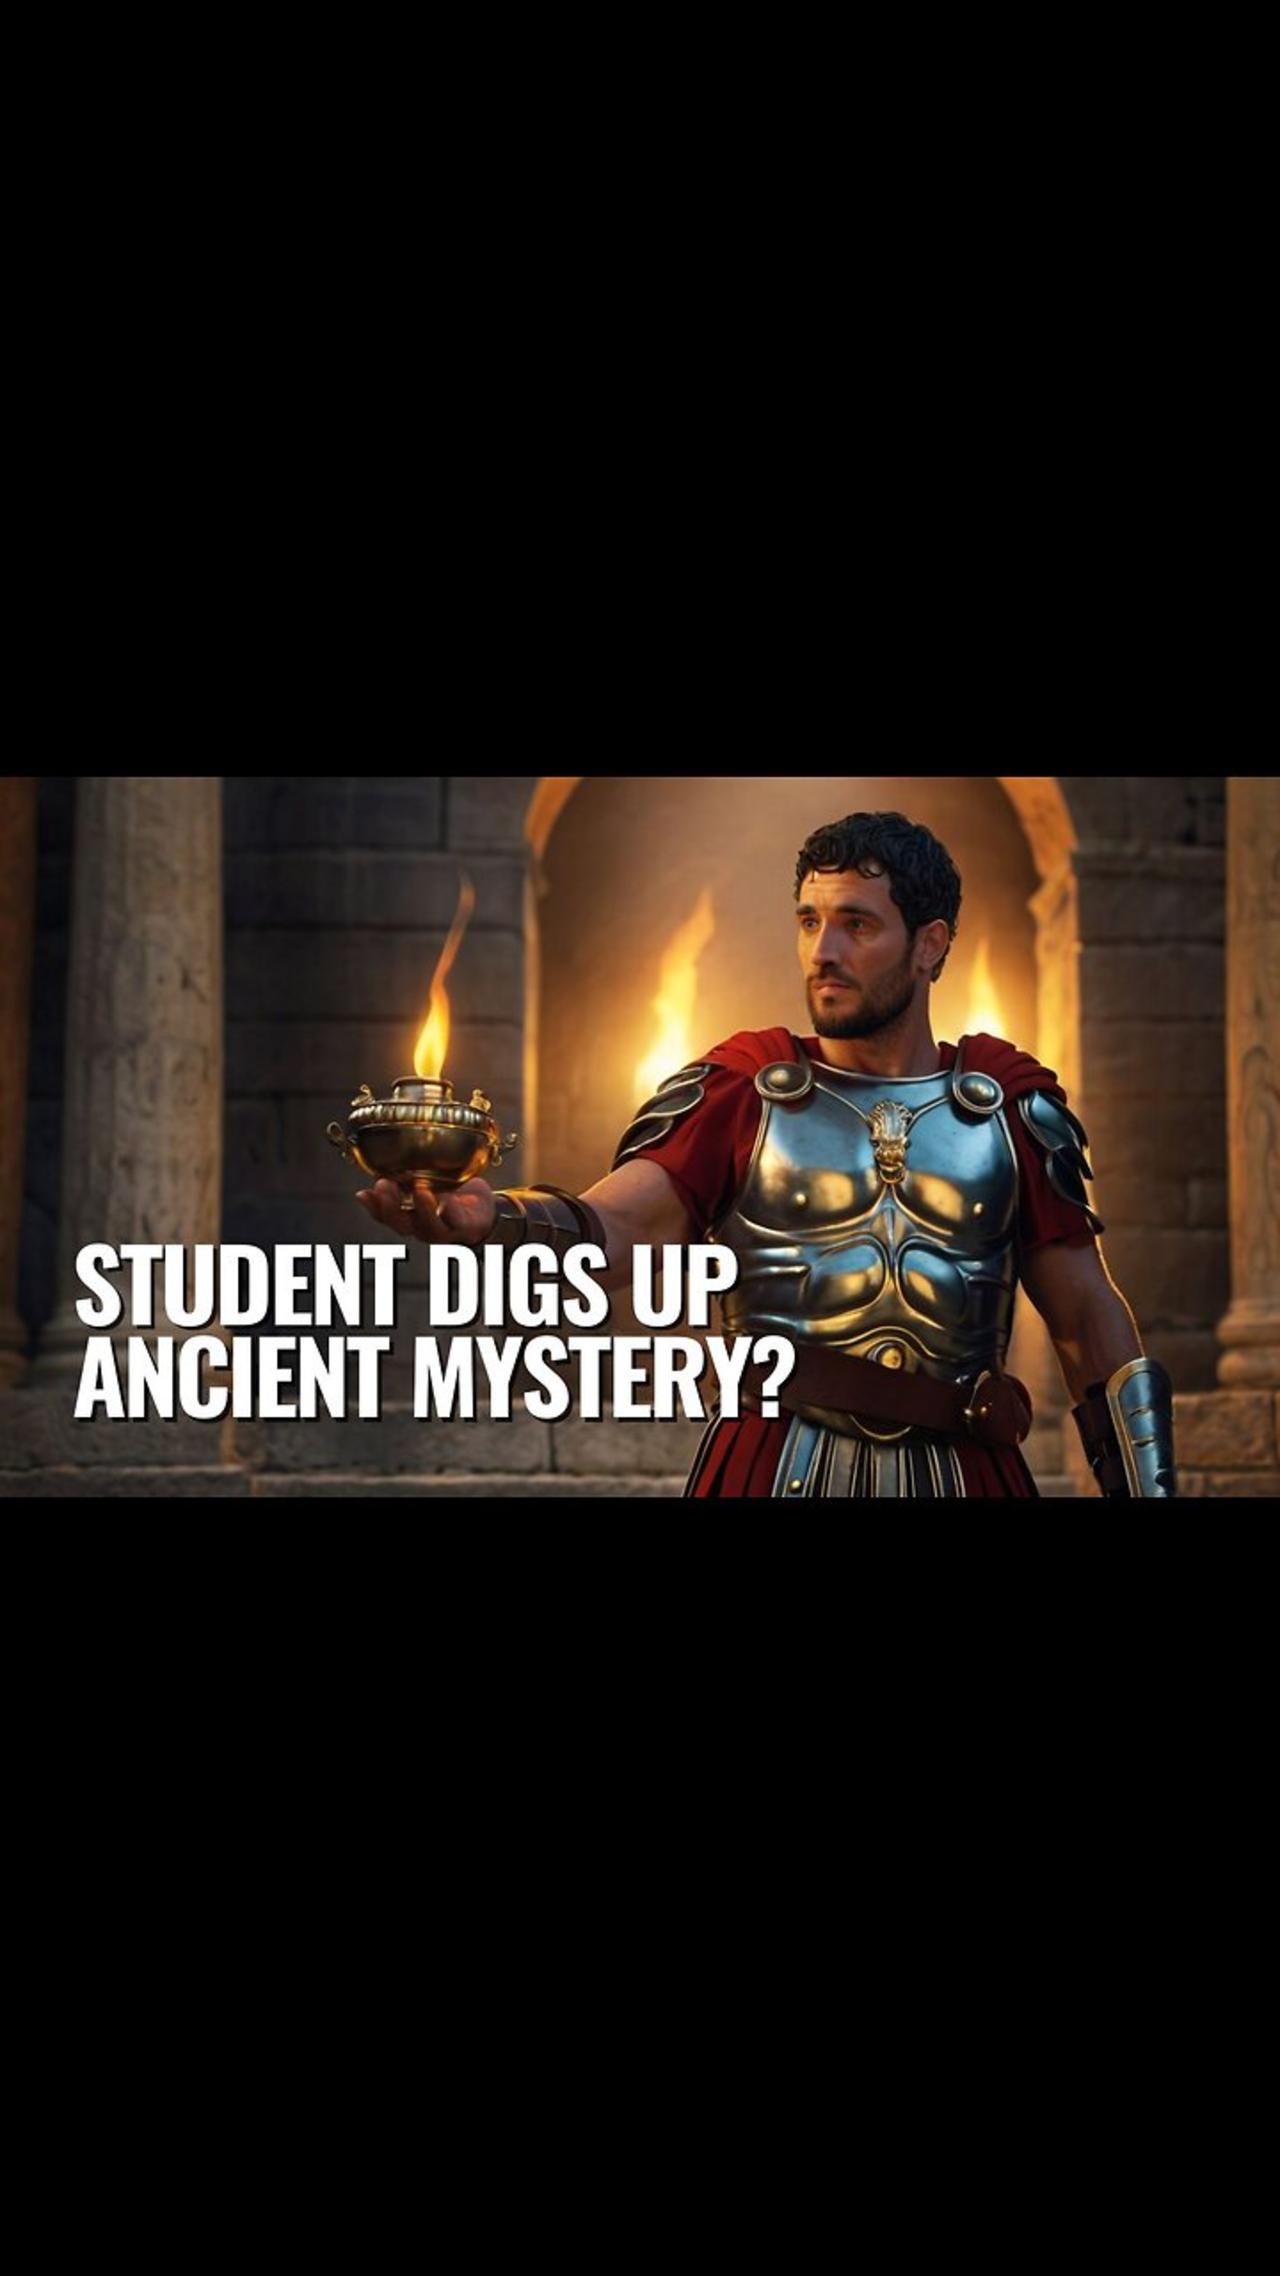 Student Digs Up Ancient Mystery?